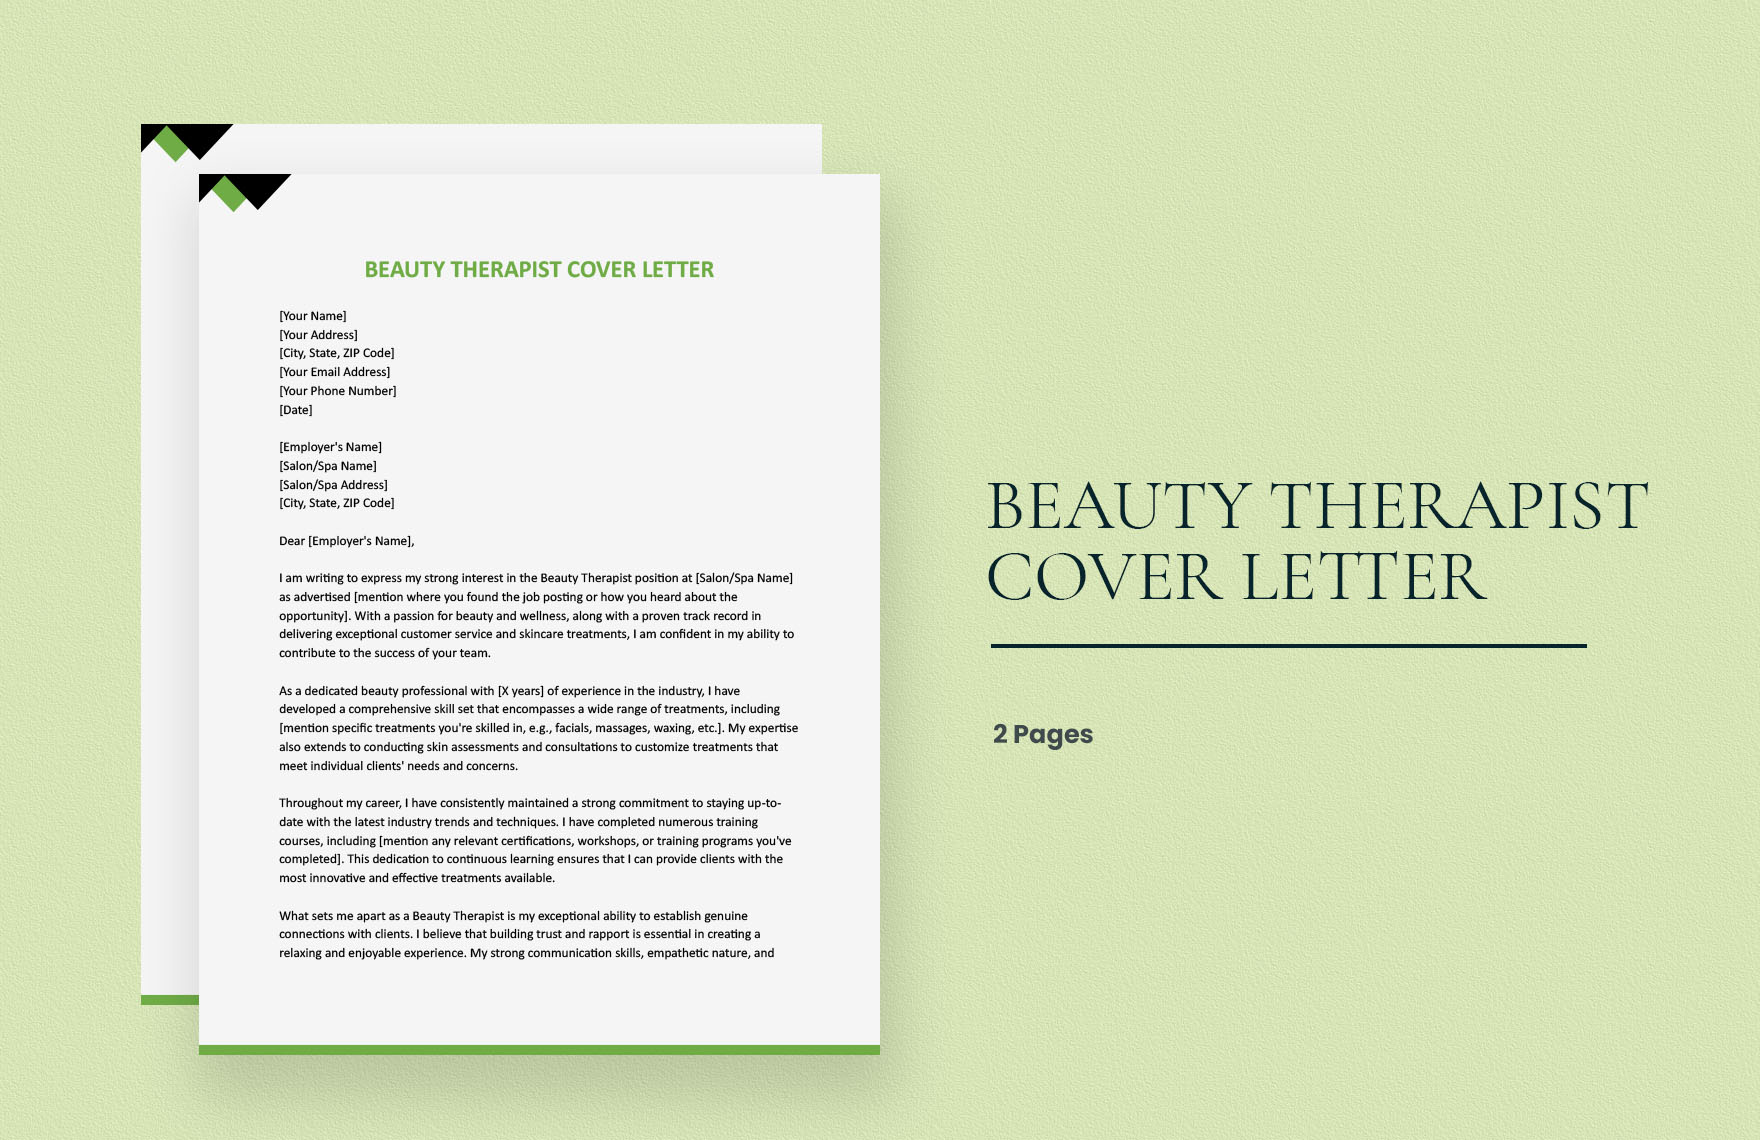 Beauty Therapist Cover Letter